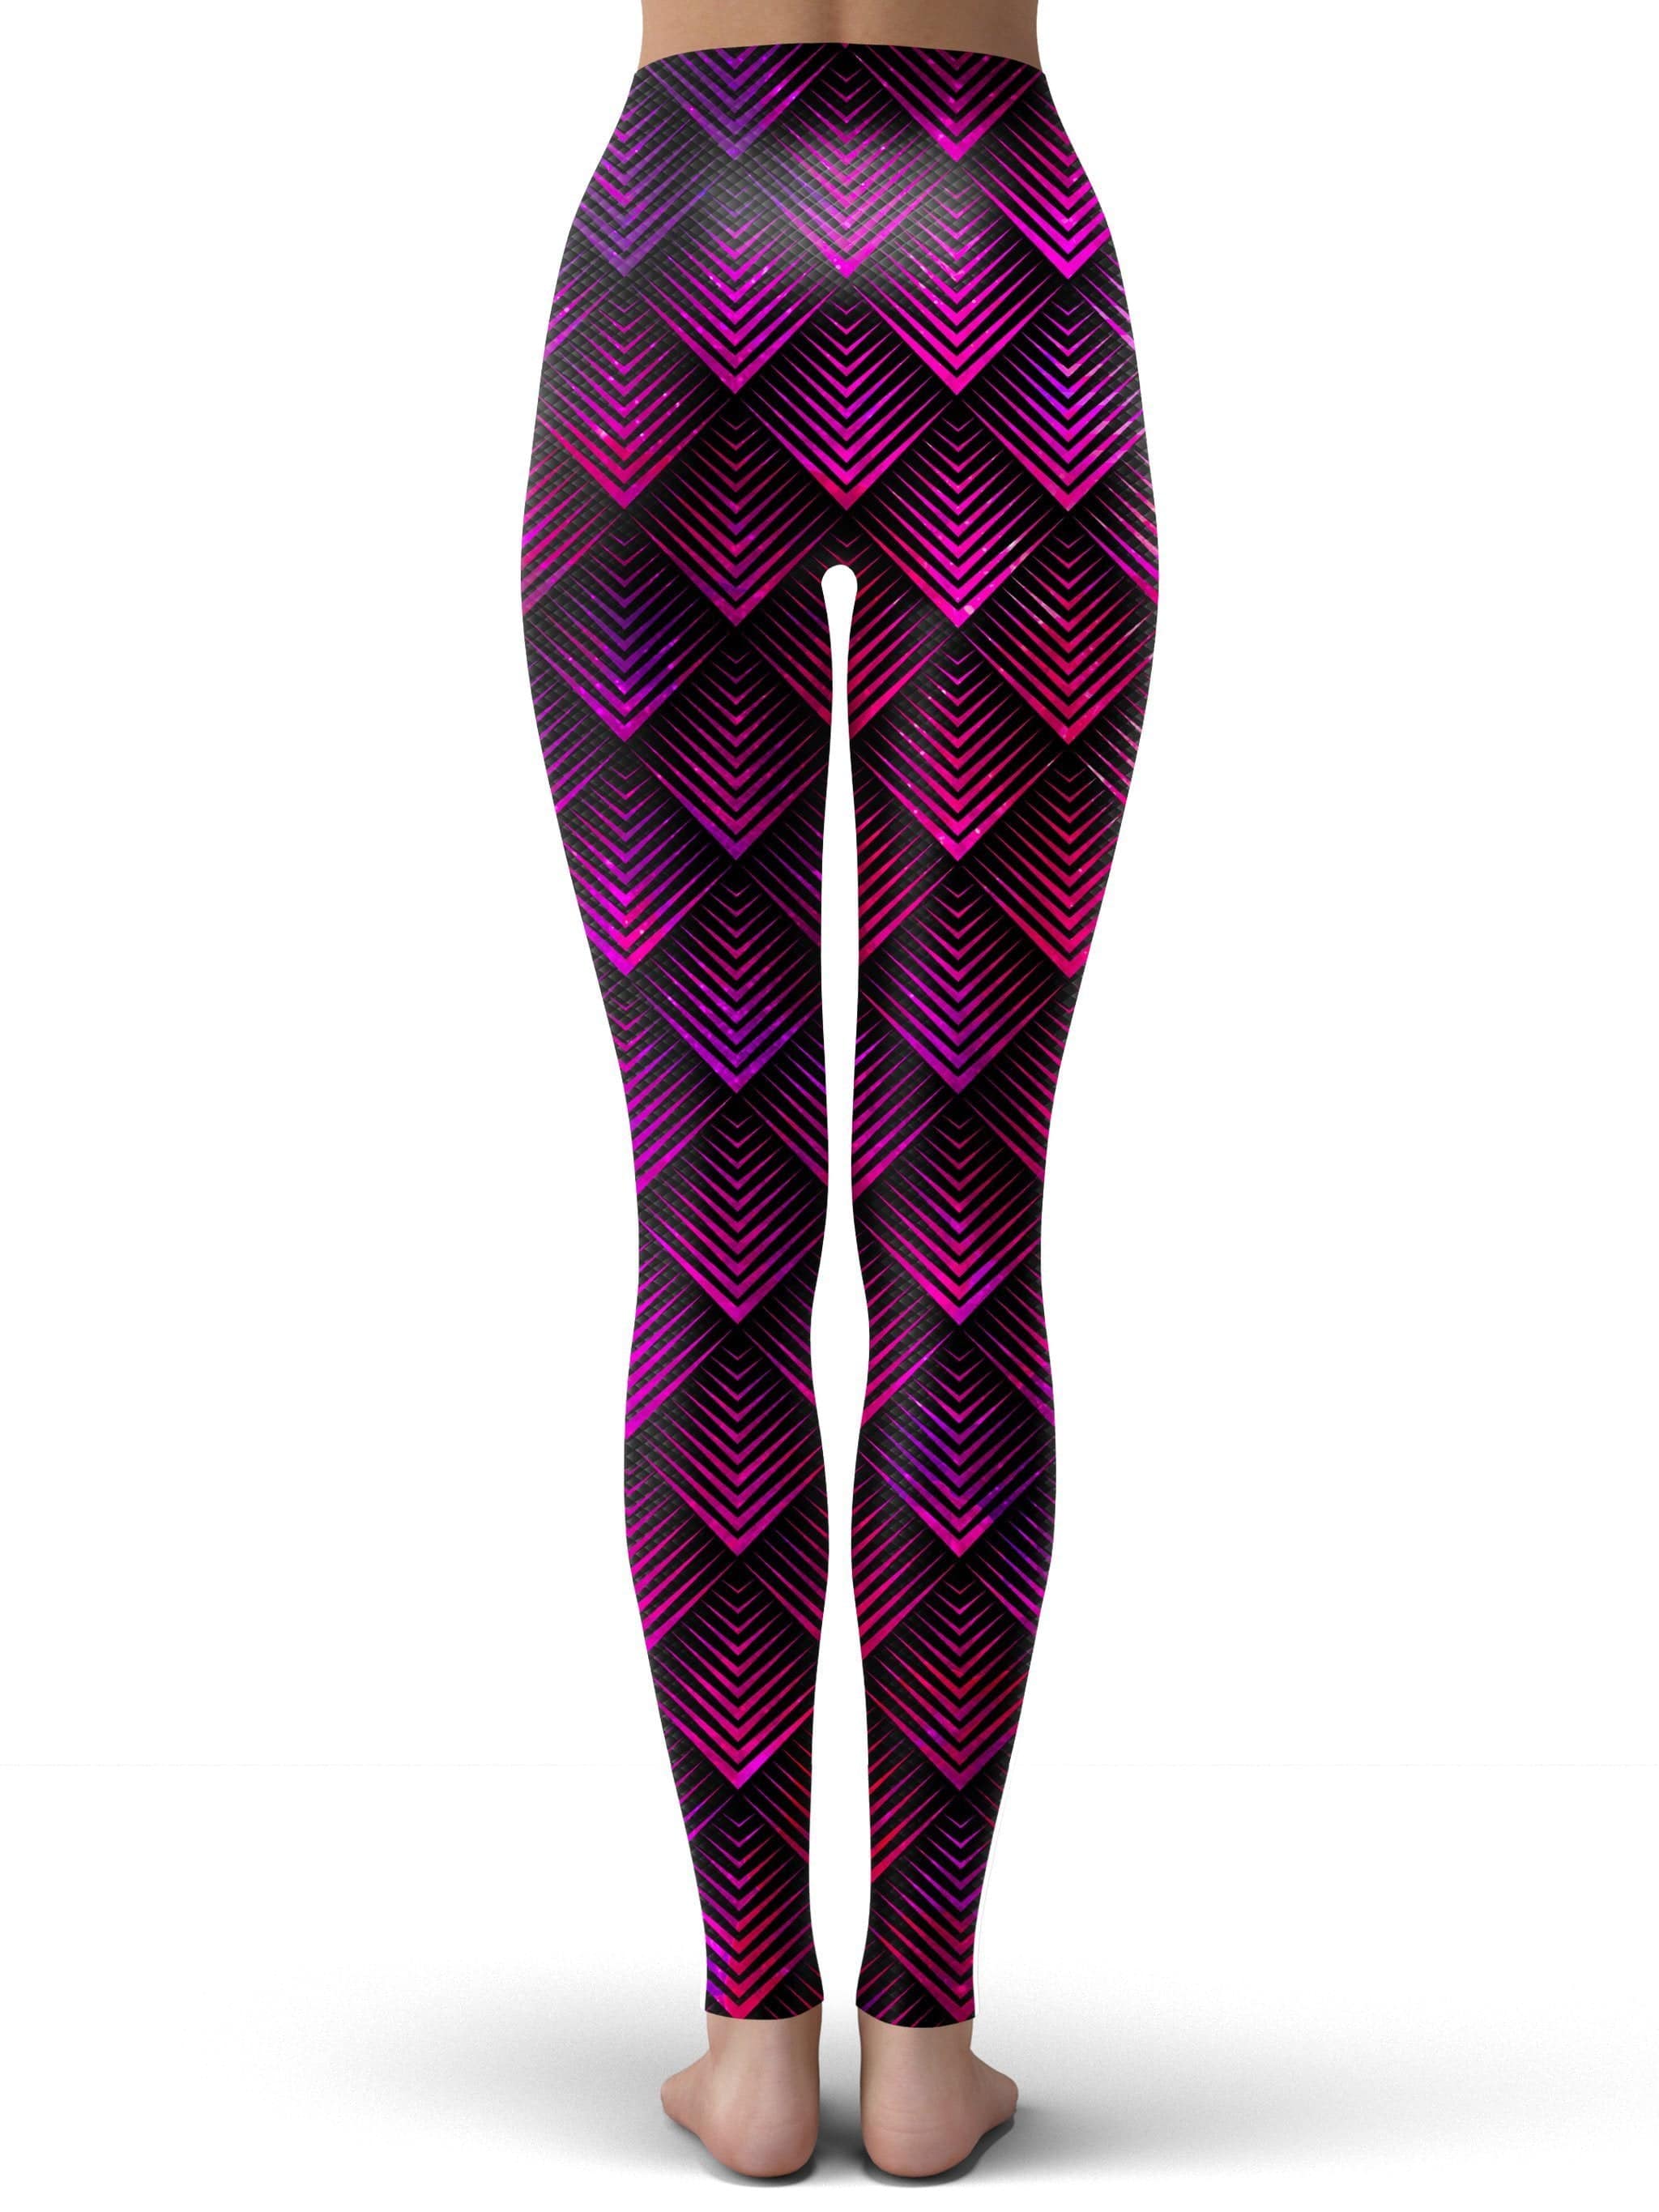 Dragon Leggings for Women Pink Purple Mid Waist Workout Pants with Dragon  Scales at  Women's Clothing store